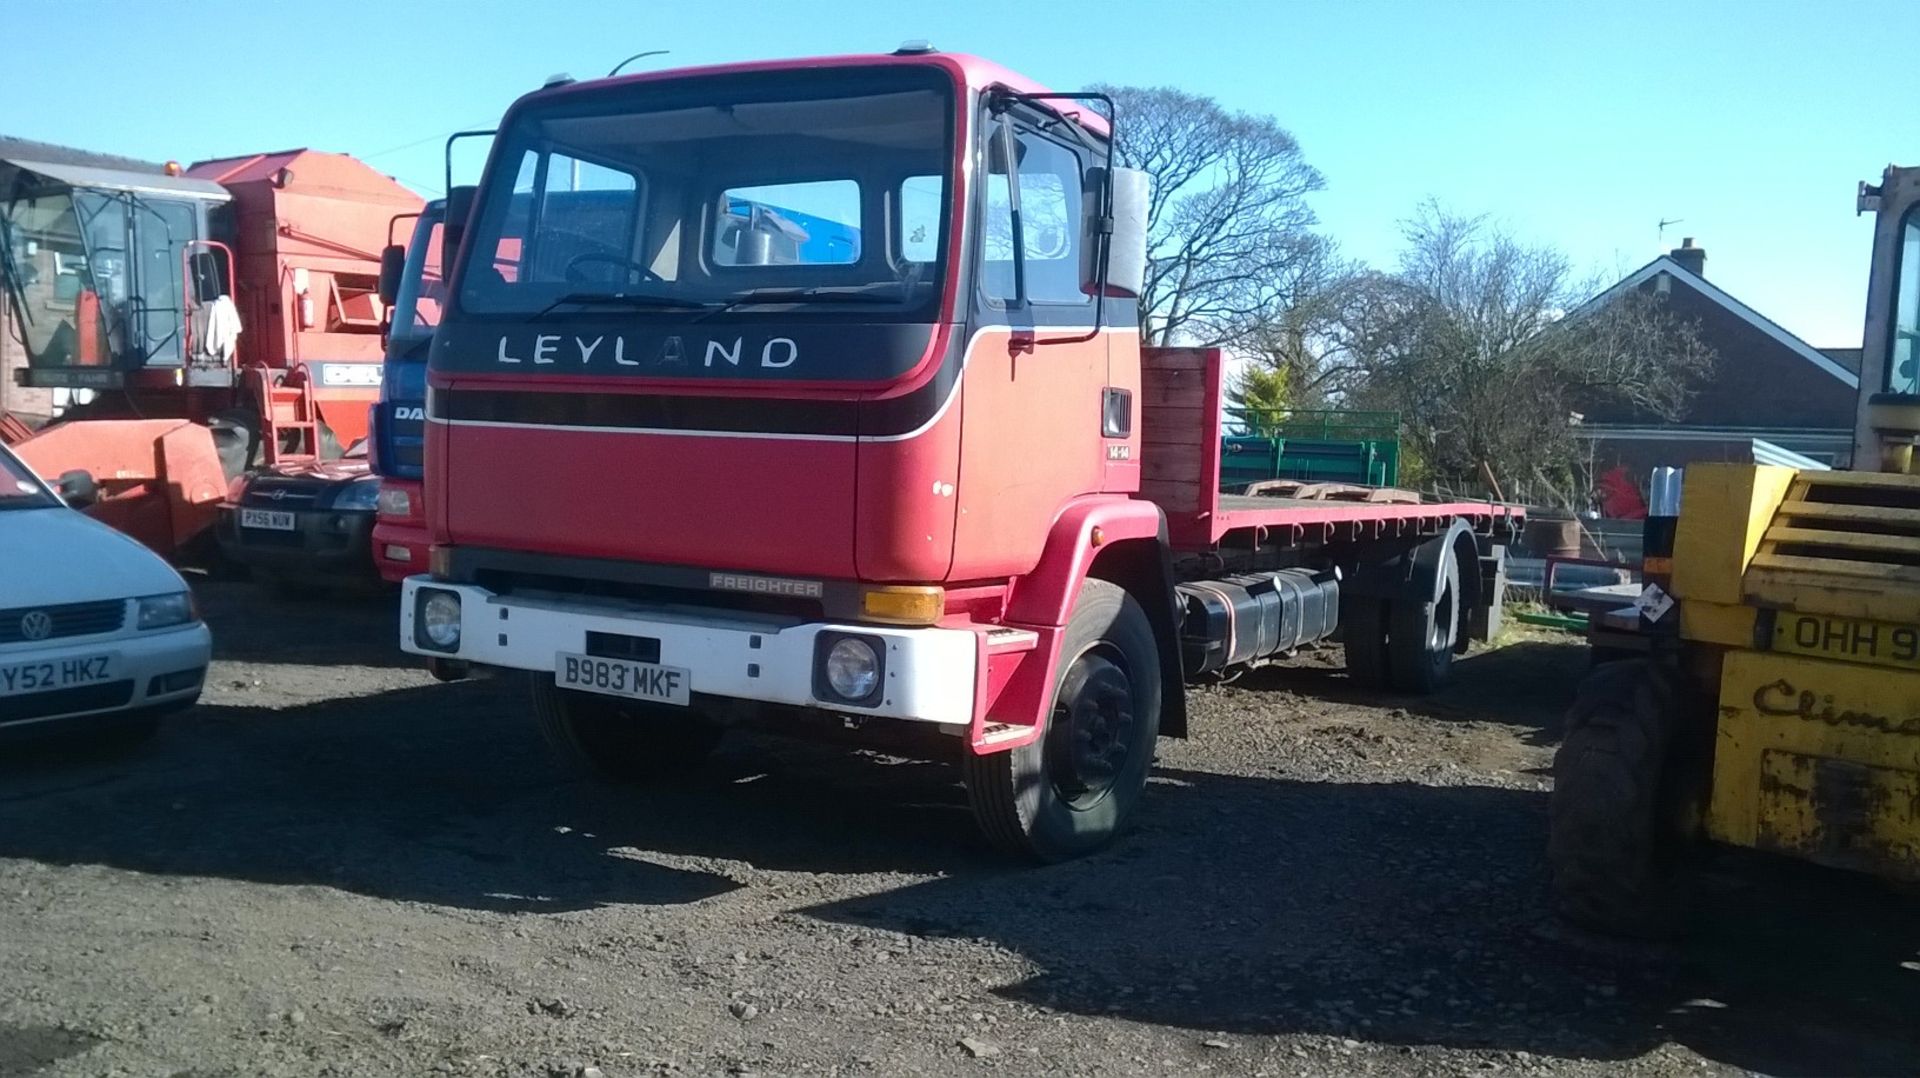 1985 Leyland Freighter 14.14 flatbed 4 wheel lorry fitted with hydraulic winch Reg. No. B983 MKF